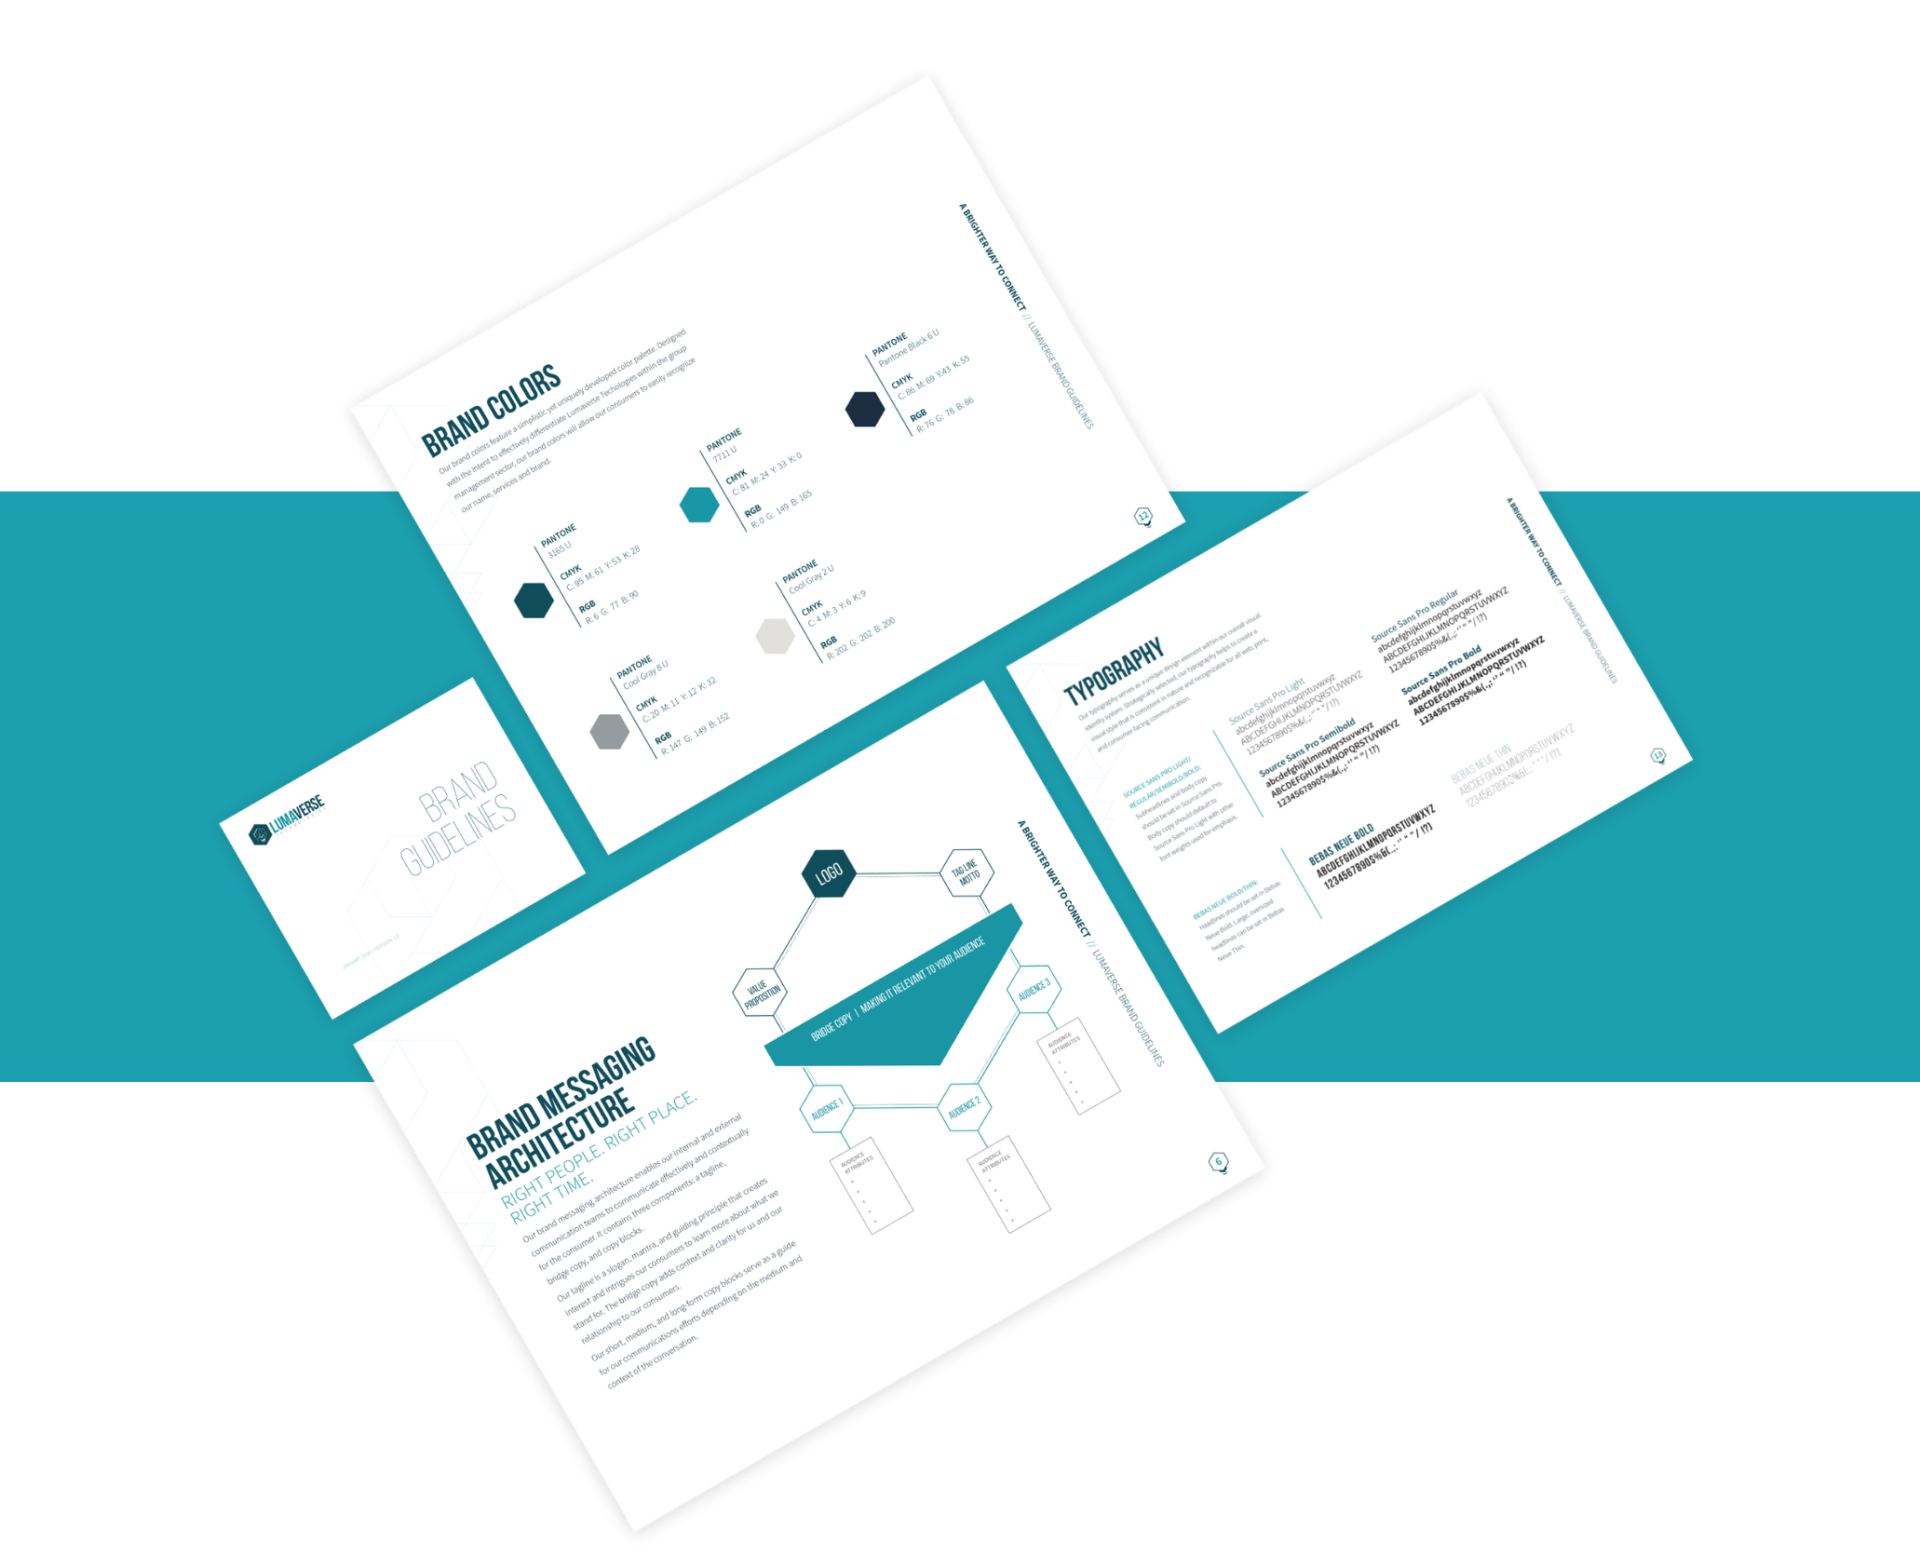 Corporate branding materials for Lumaverse Technologies spread out on a flat surface, featuring a cohesive teal and white color scheme with various text and design elements, suggesting a professional company identity package.